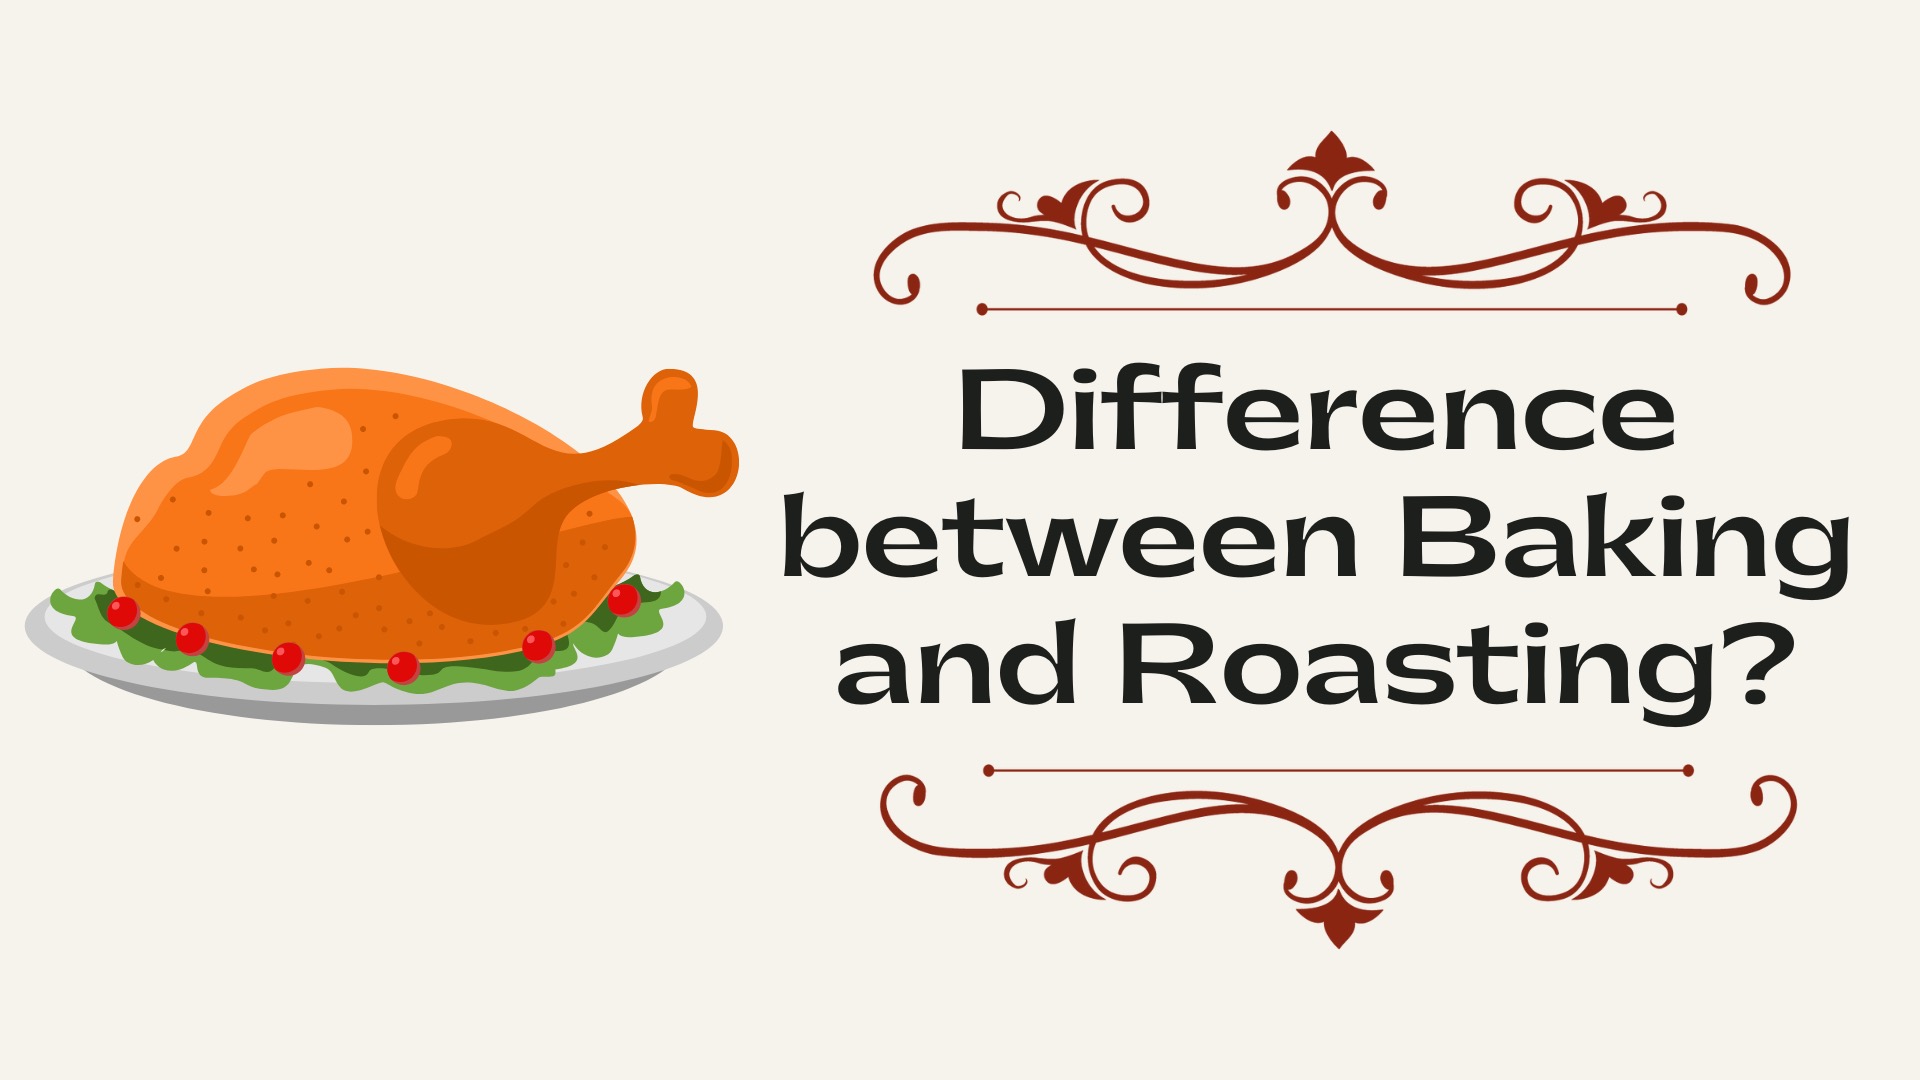 What is The Difference between Baking and Roasting